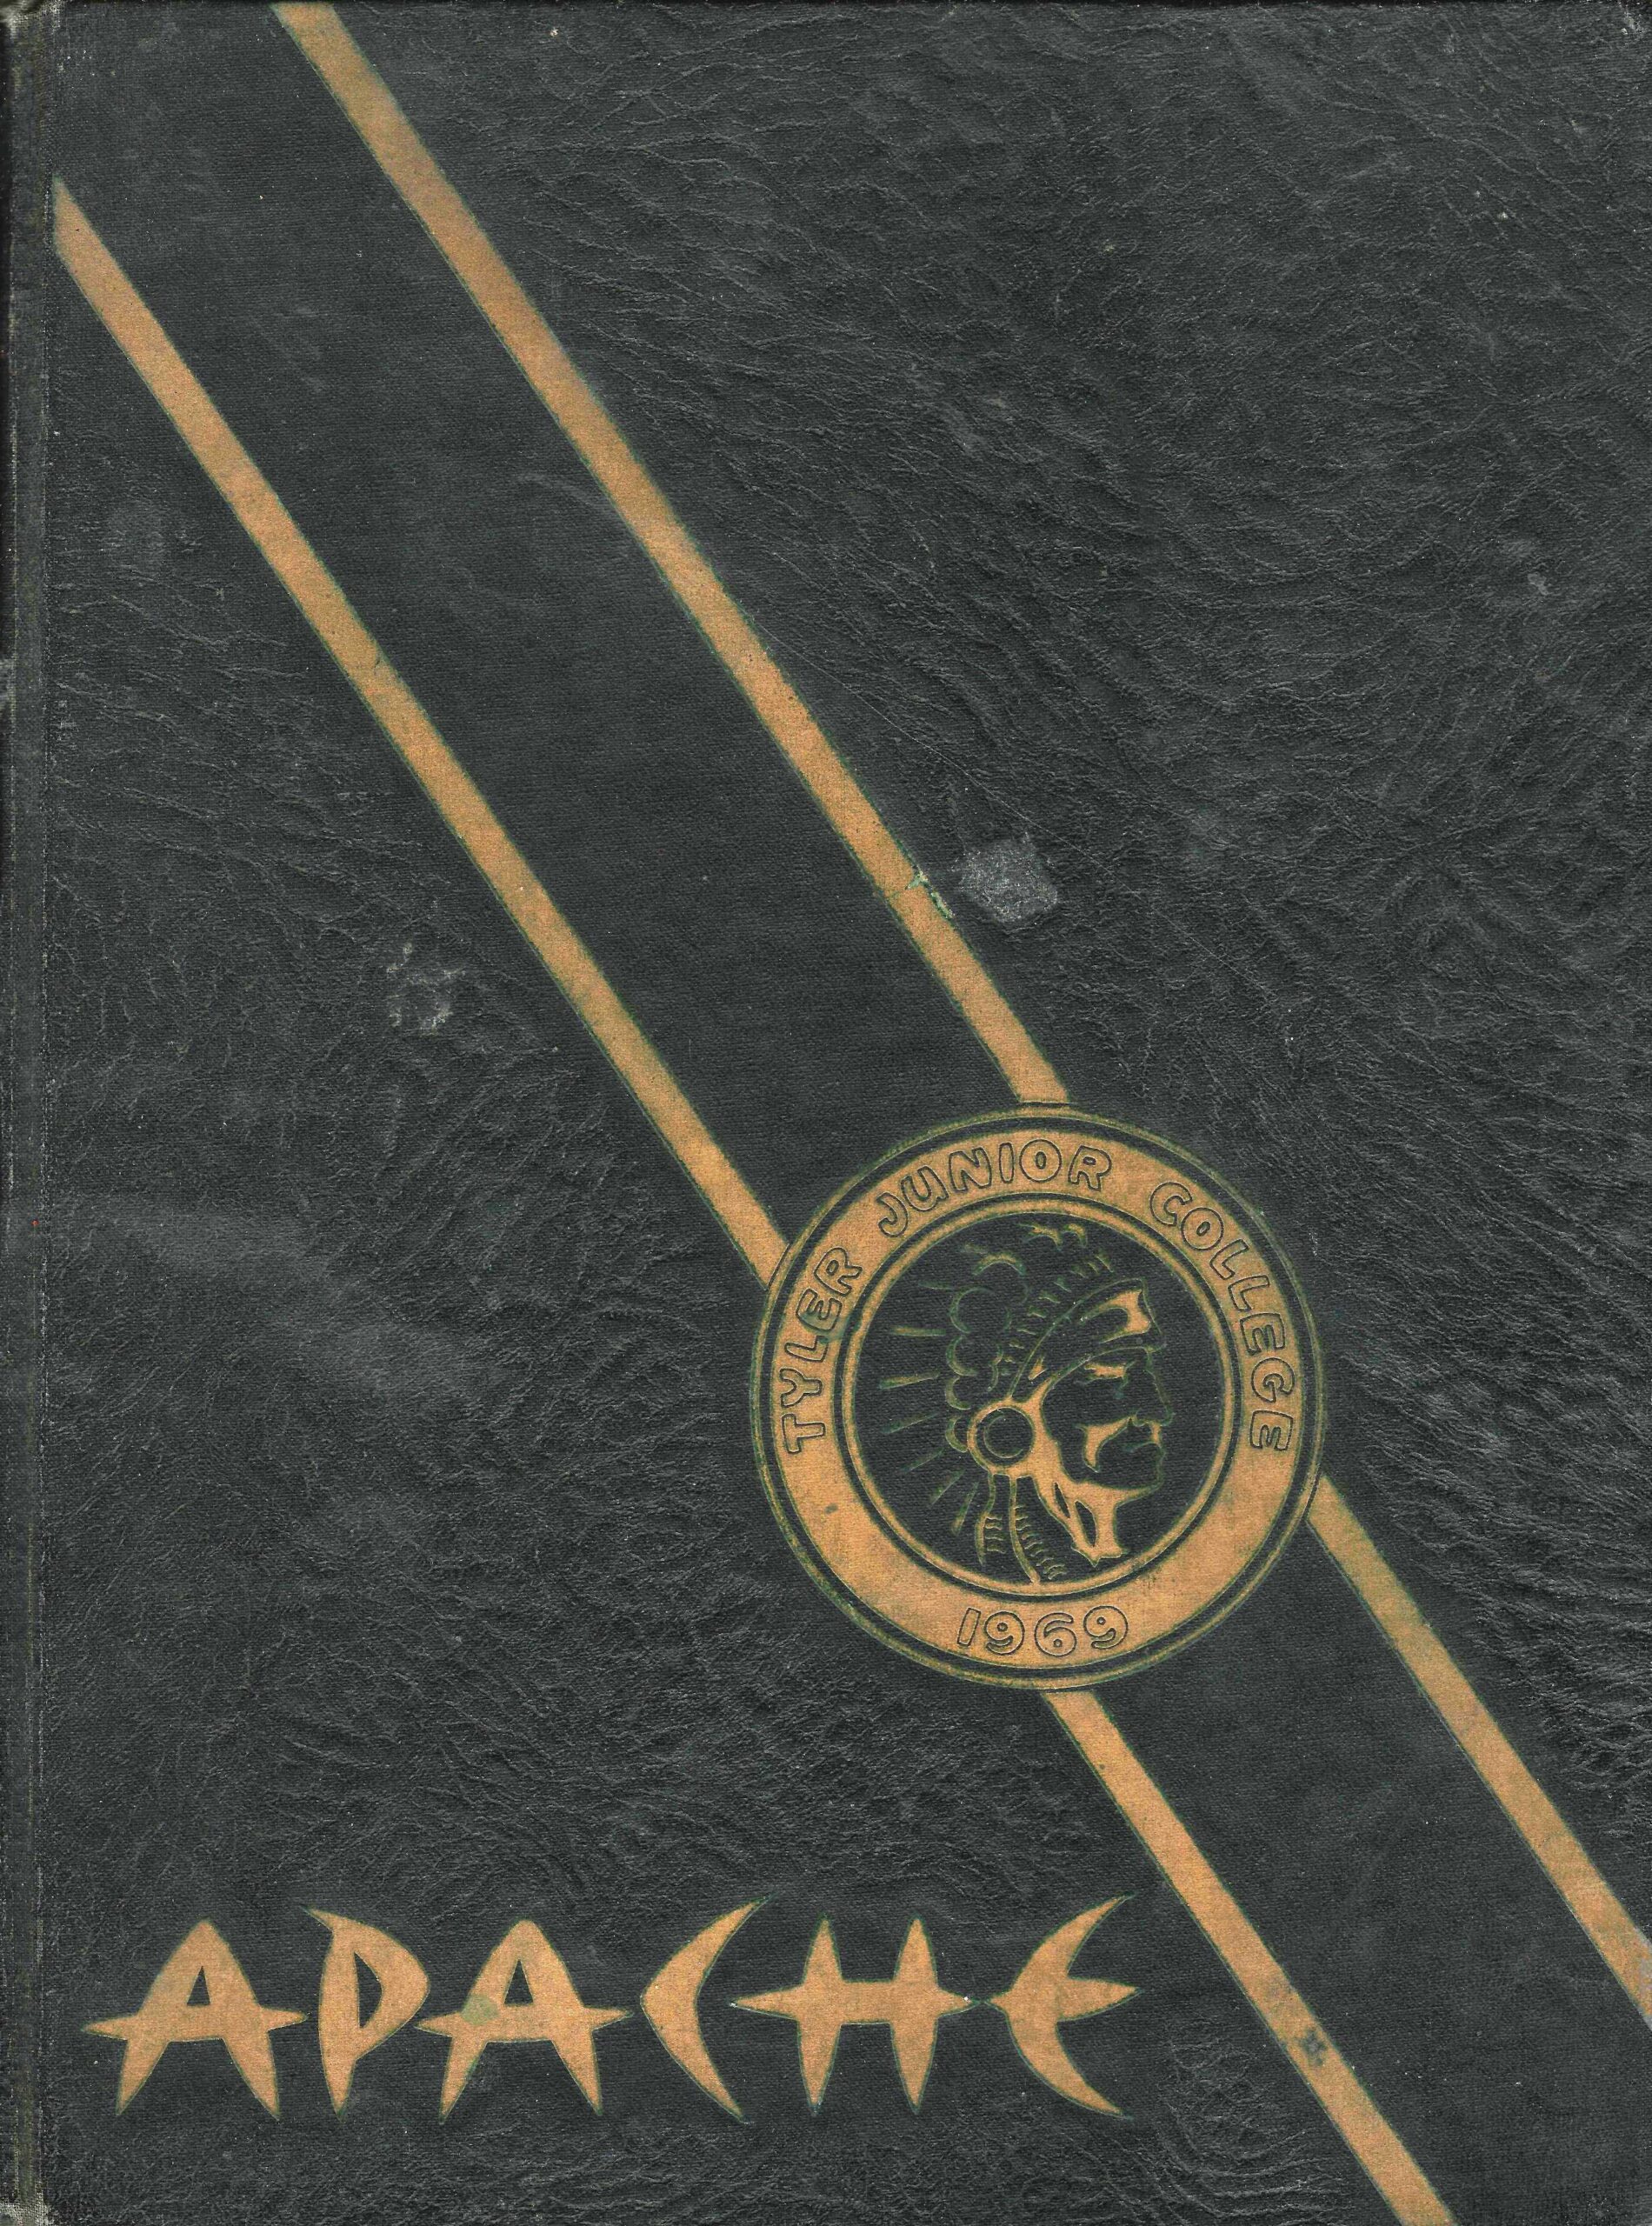 1969 for Tyler Junior College Apache Annual Yearbook , Tyler, Smith County, Texas.